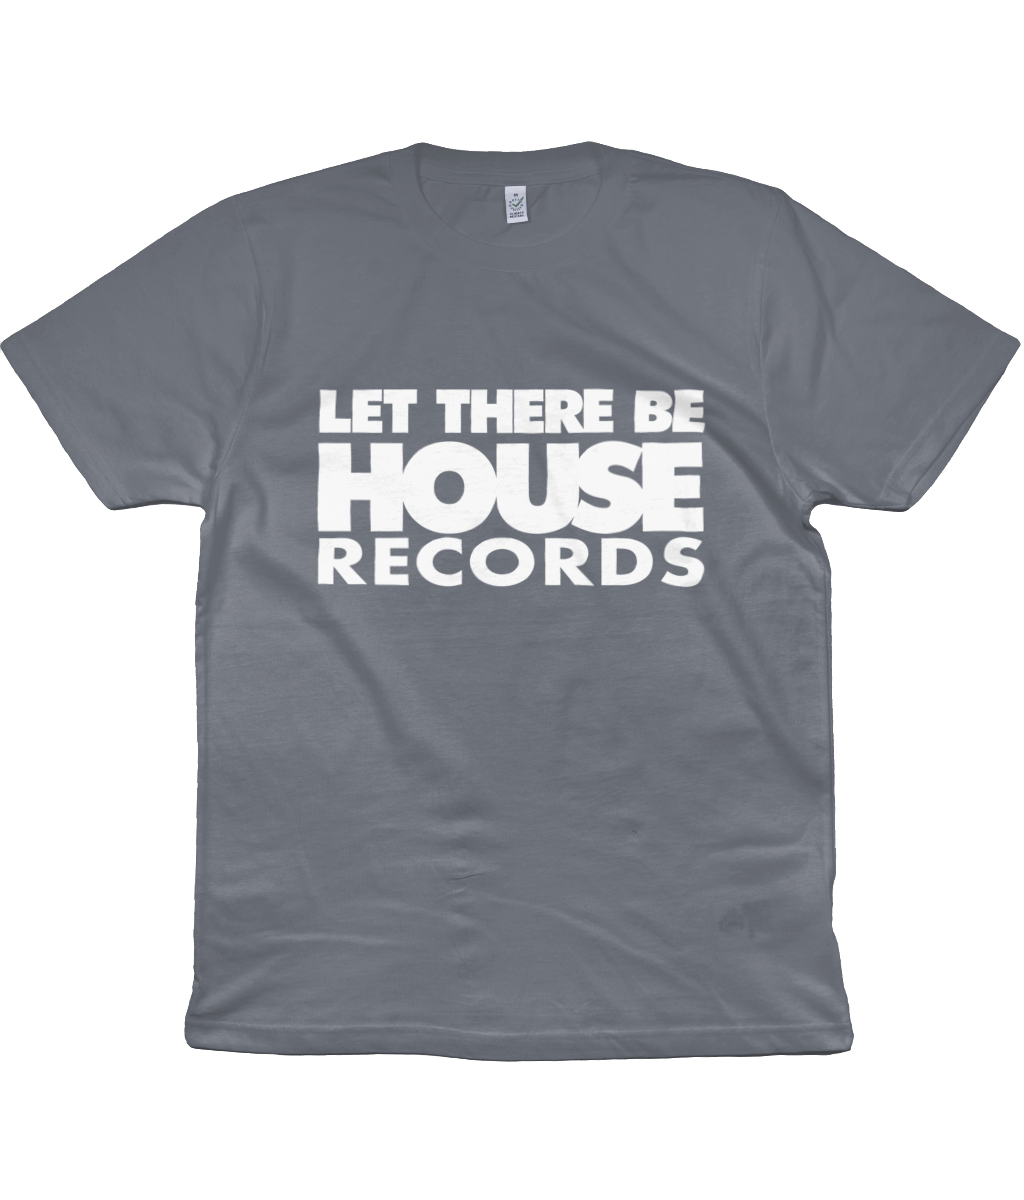 T-Shirt LTBH Records White